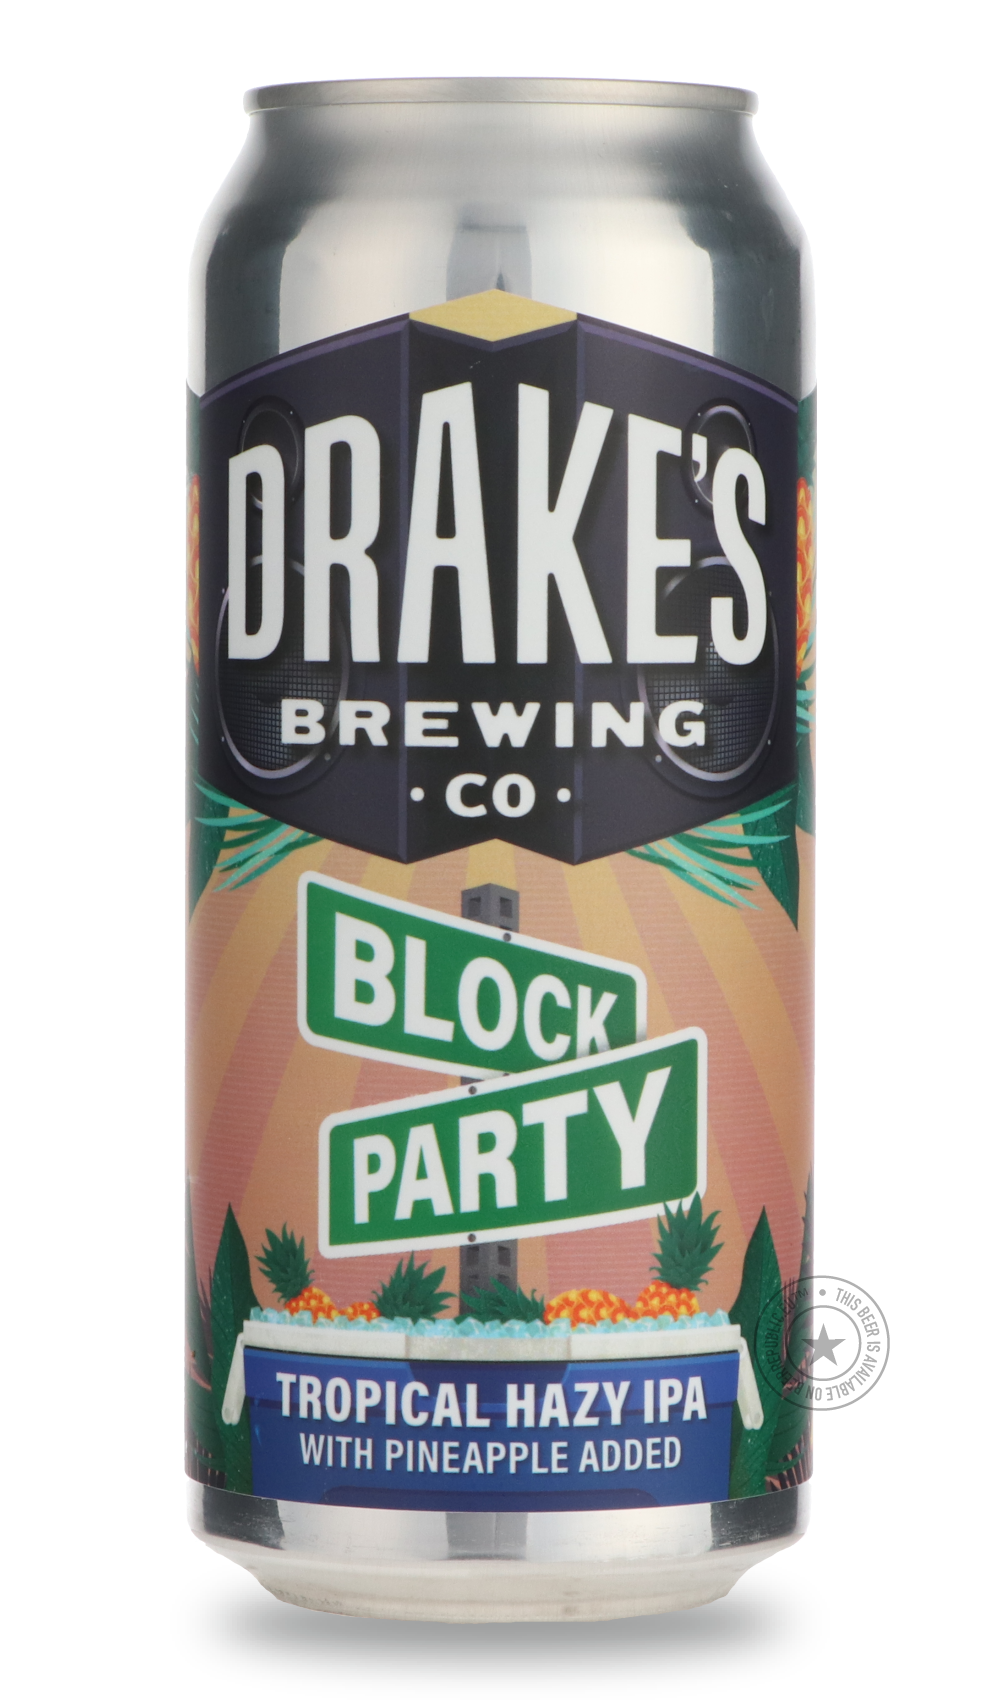 -Drake's- Block Party-IPA- Only @ Beer Republic - The best online beer store for American & Canadian craft beer - Buy beer online from the USA and Canada - Bier online kopen - Amerikaans bier kopen - Craft beer store - Craft beer kopen - Amerikanisch bier kaufen - Bier online kaufen - Acheter biere online - IPA - Stout - Porter - New England IPA - Hazy IPA - Imperial Stout - Barrel Aged - Barrel Aged Imperial Stout - Brown - Dark beer - Blond - Blonde - Pilsner - Lager - Wheat - Weizen - Amber - Barley Wine